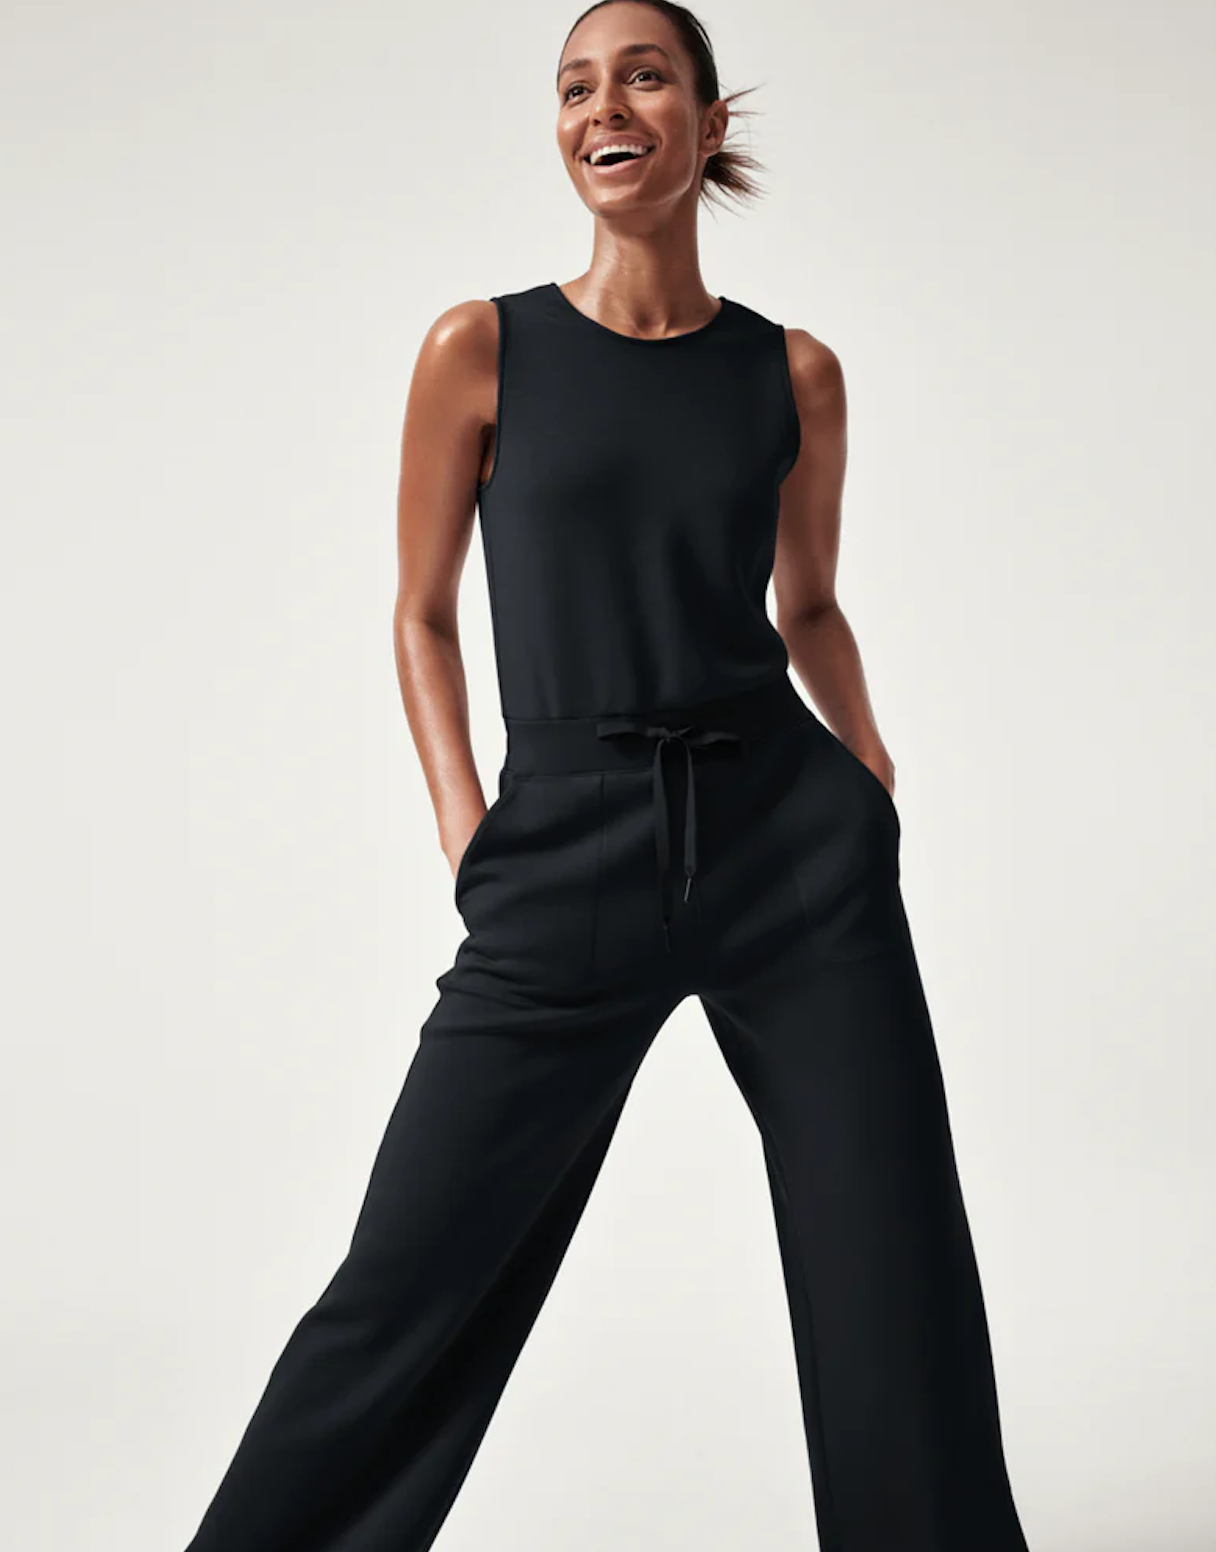 SPANX Air Essentials Jumpsuit-1 - 50 IS NOT OLD - A Fashion And Beauty Blog  For Women Over 50